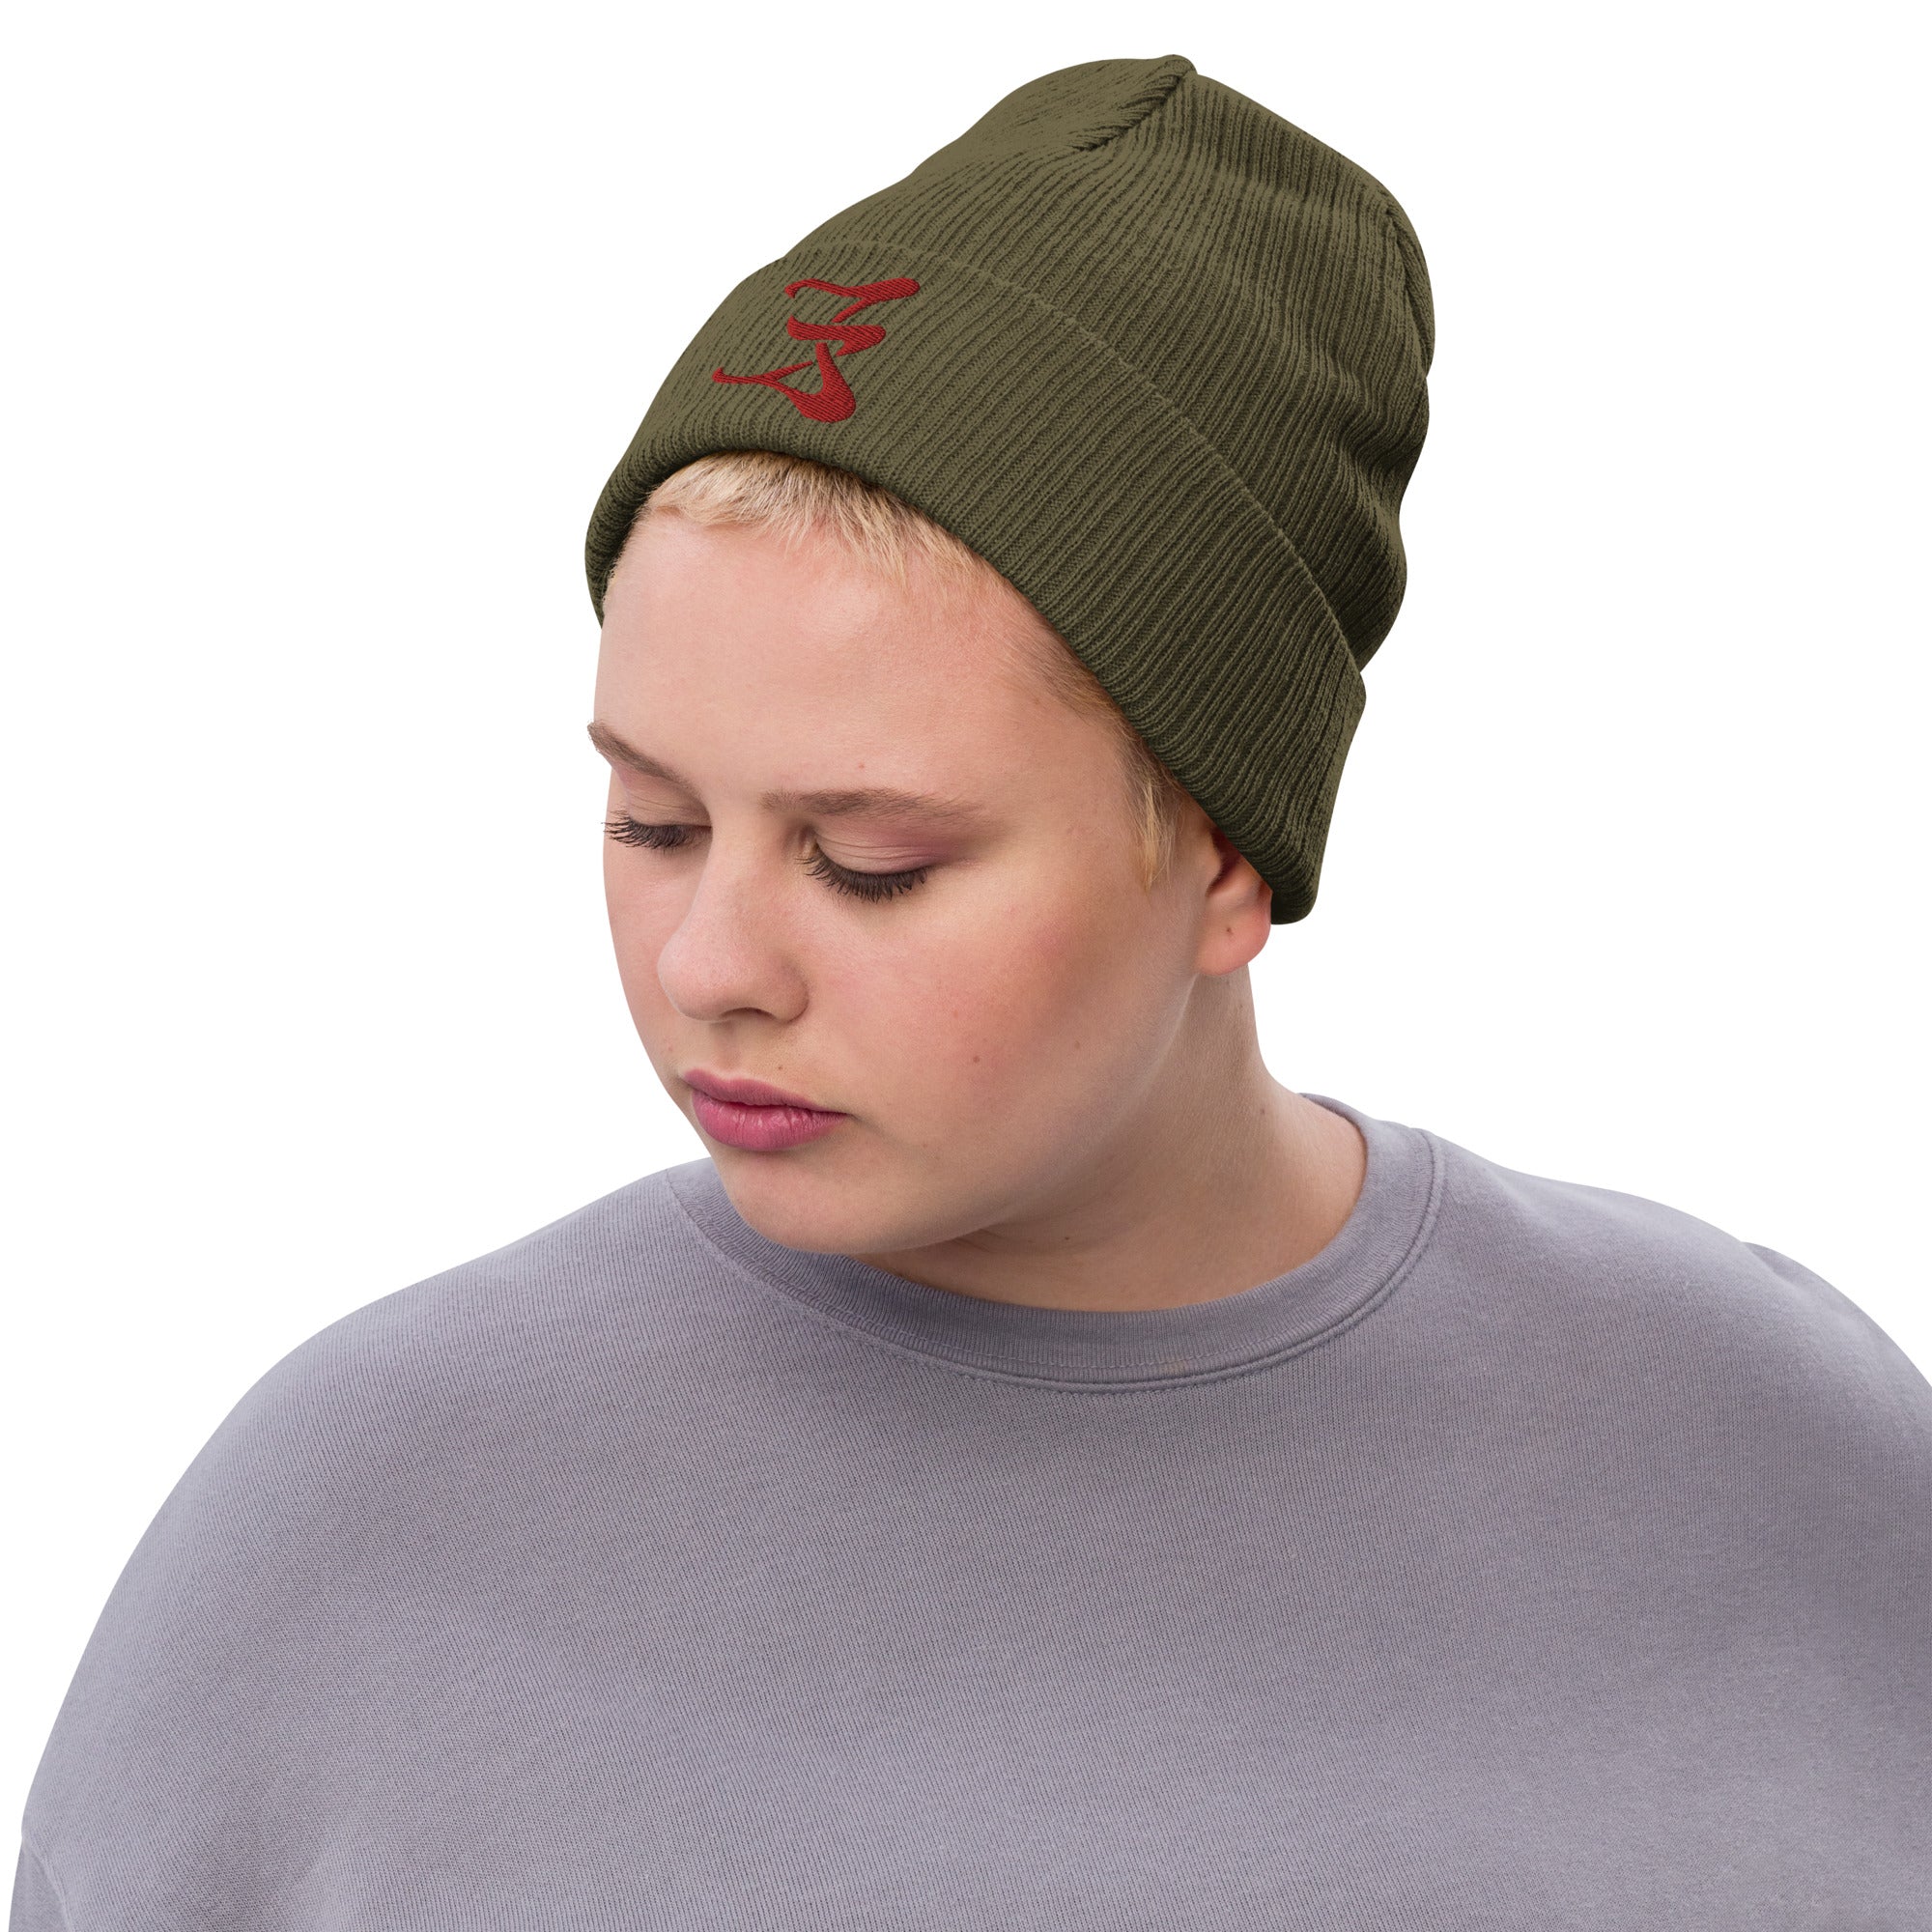 Ribbed knit beanie red logo #1